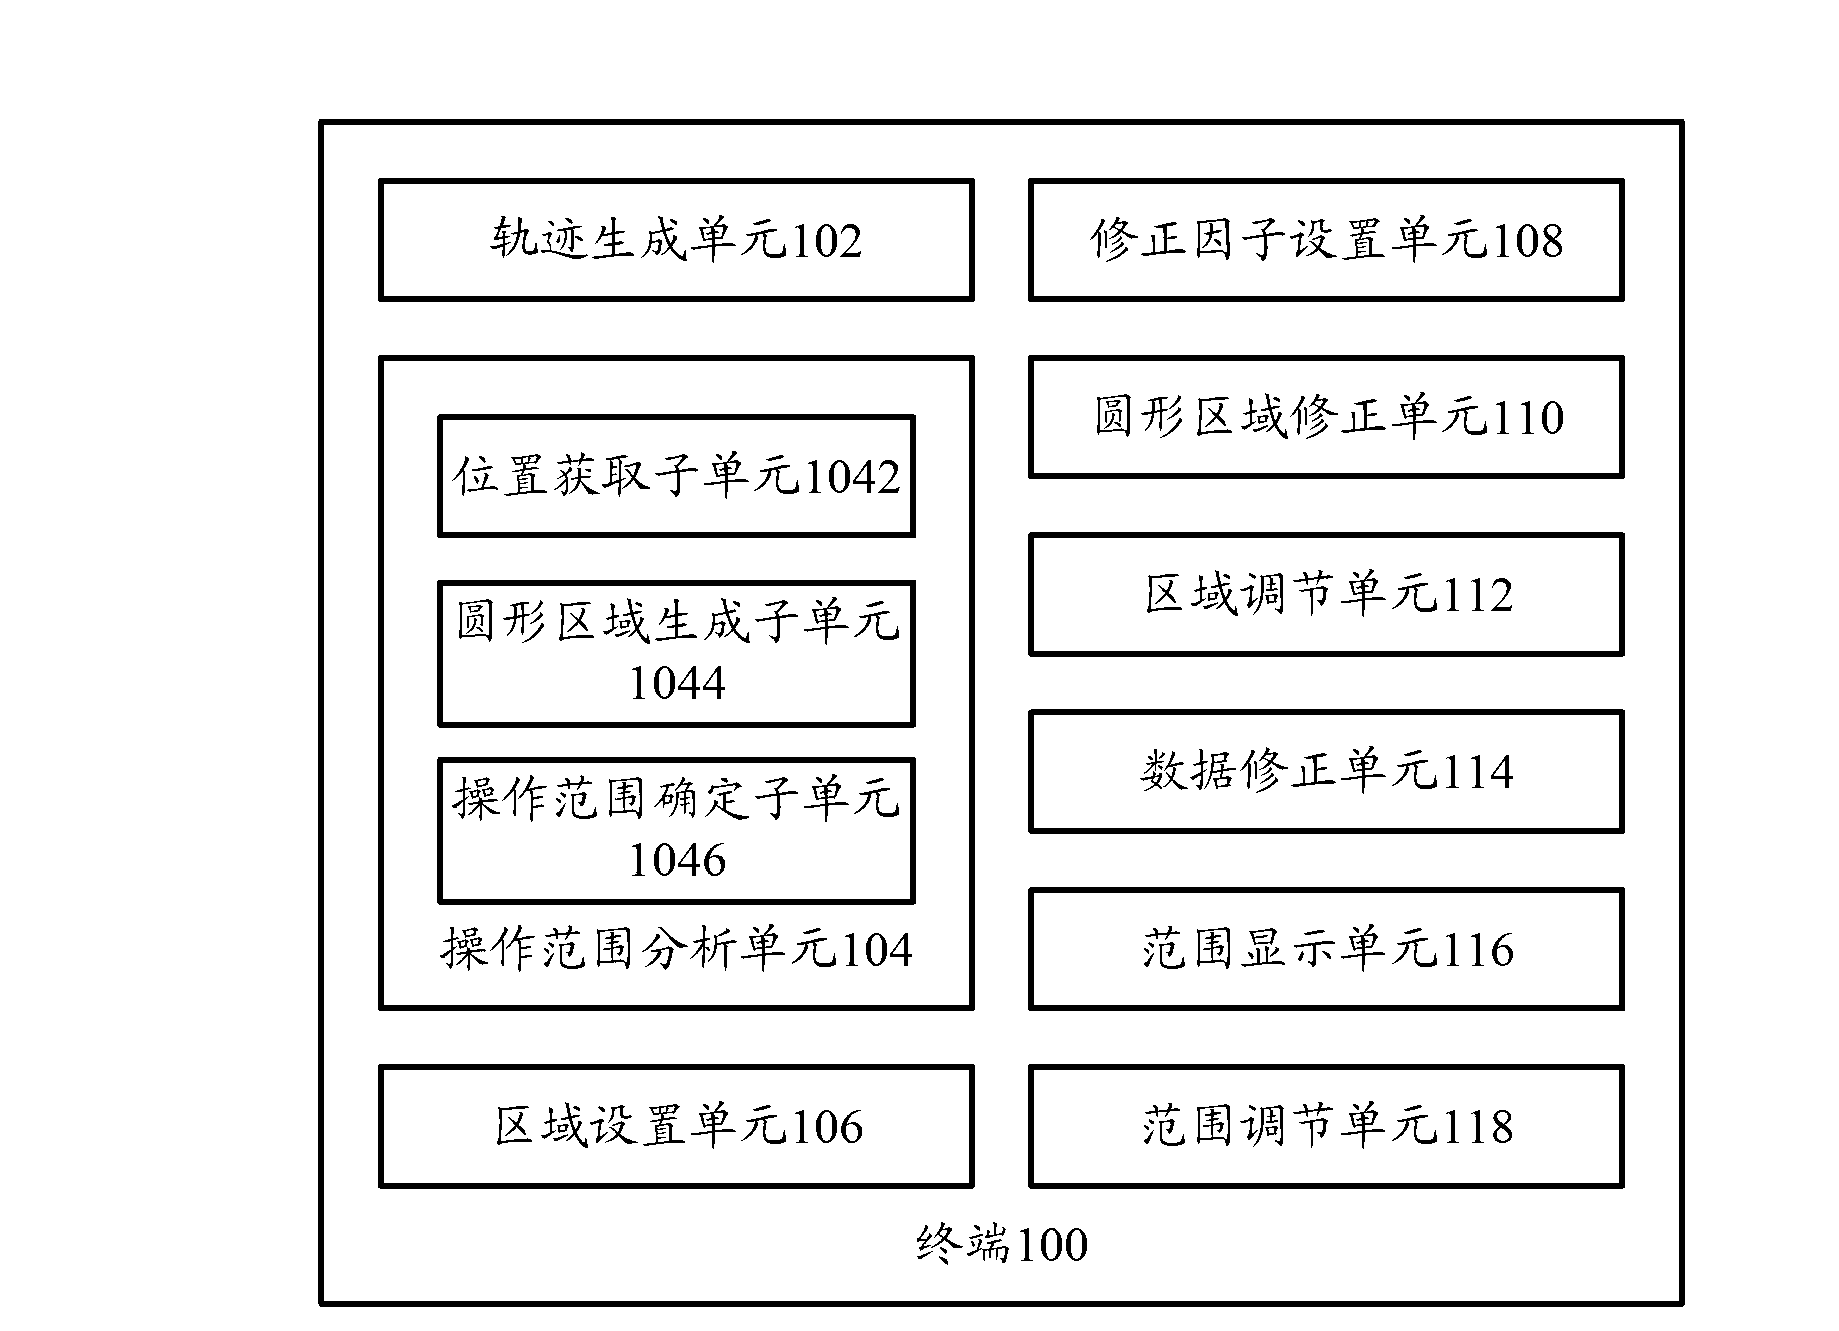 Terminal and terminal operation and control method